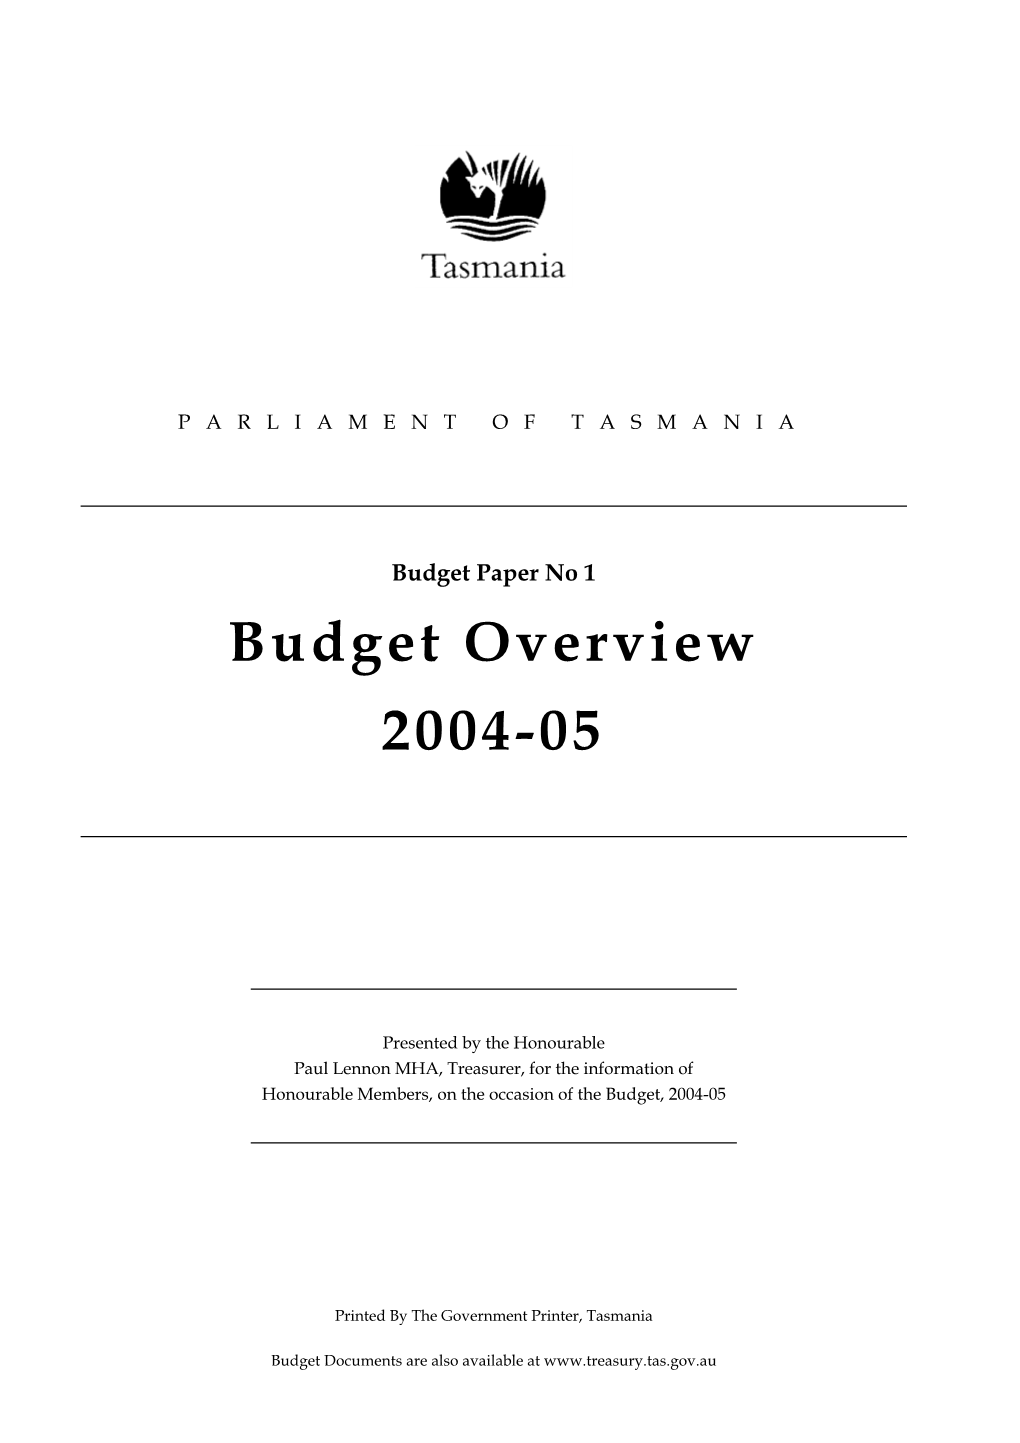 Budget Overview 2004-05